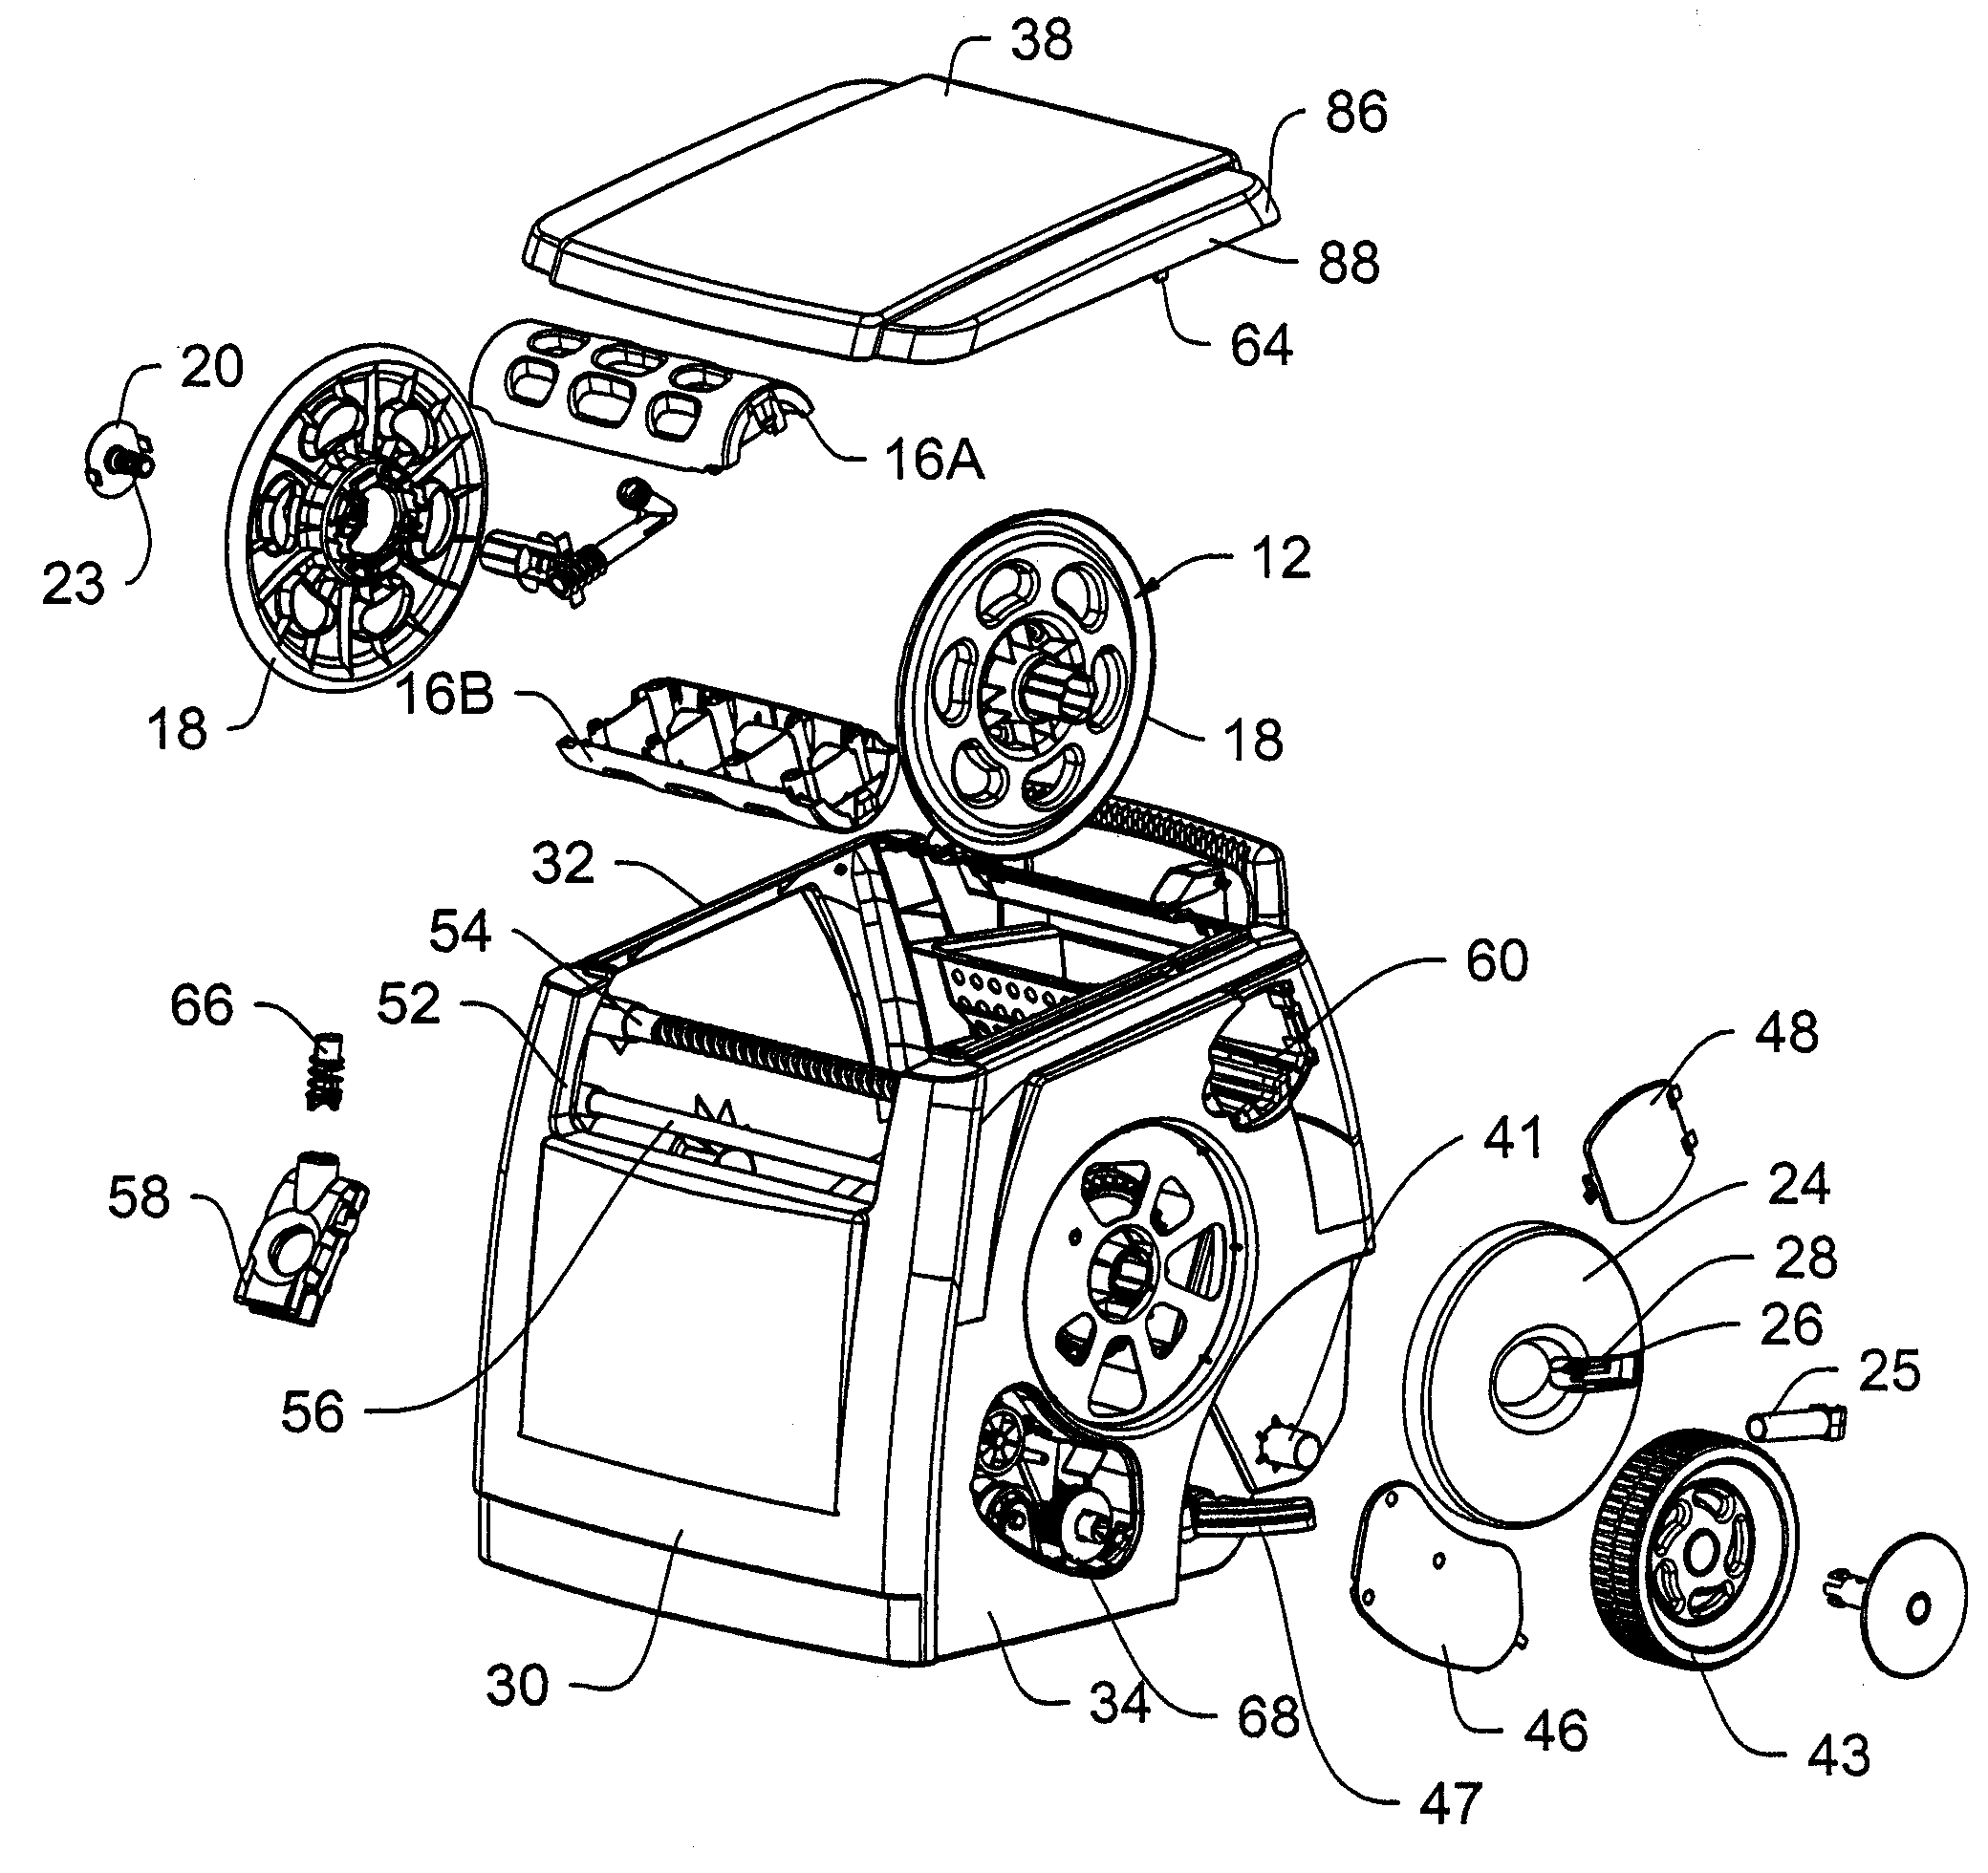 Direct current powered hose rewinding apparatus